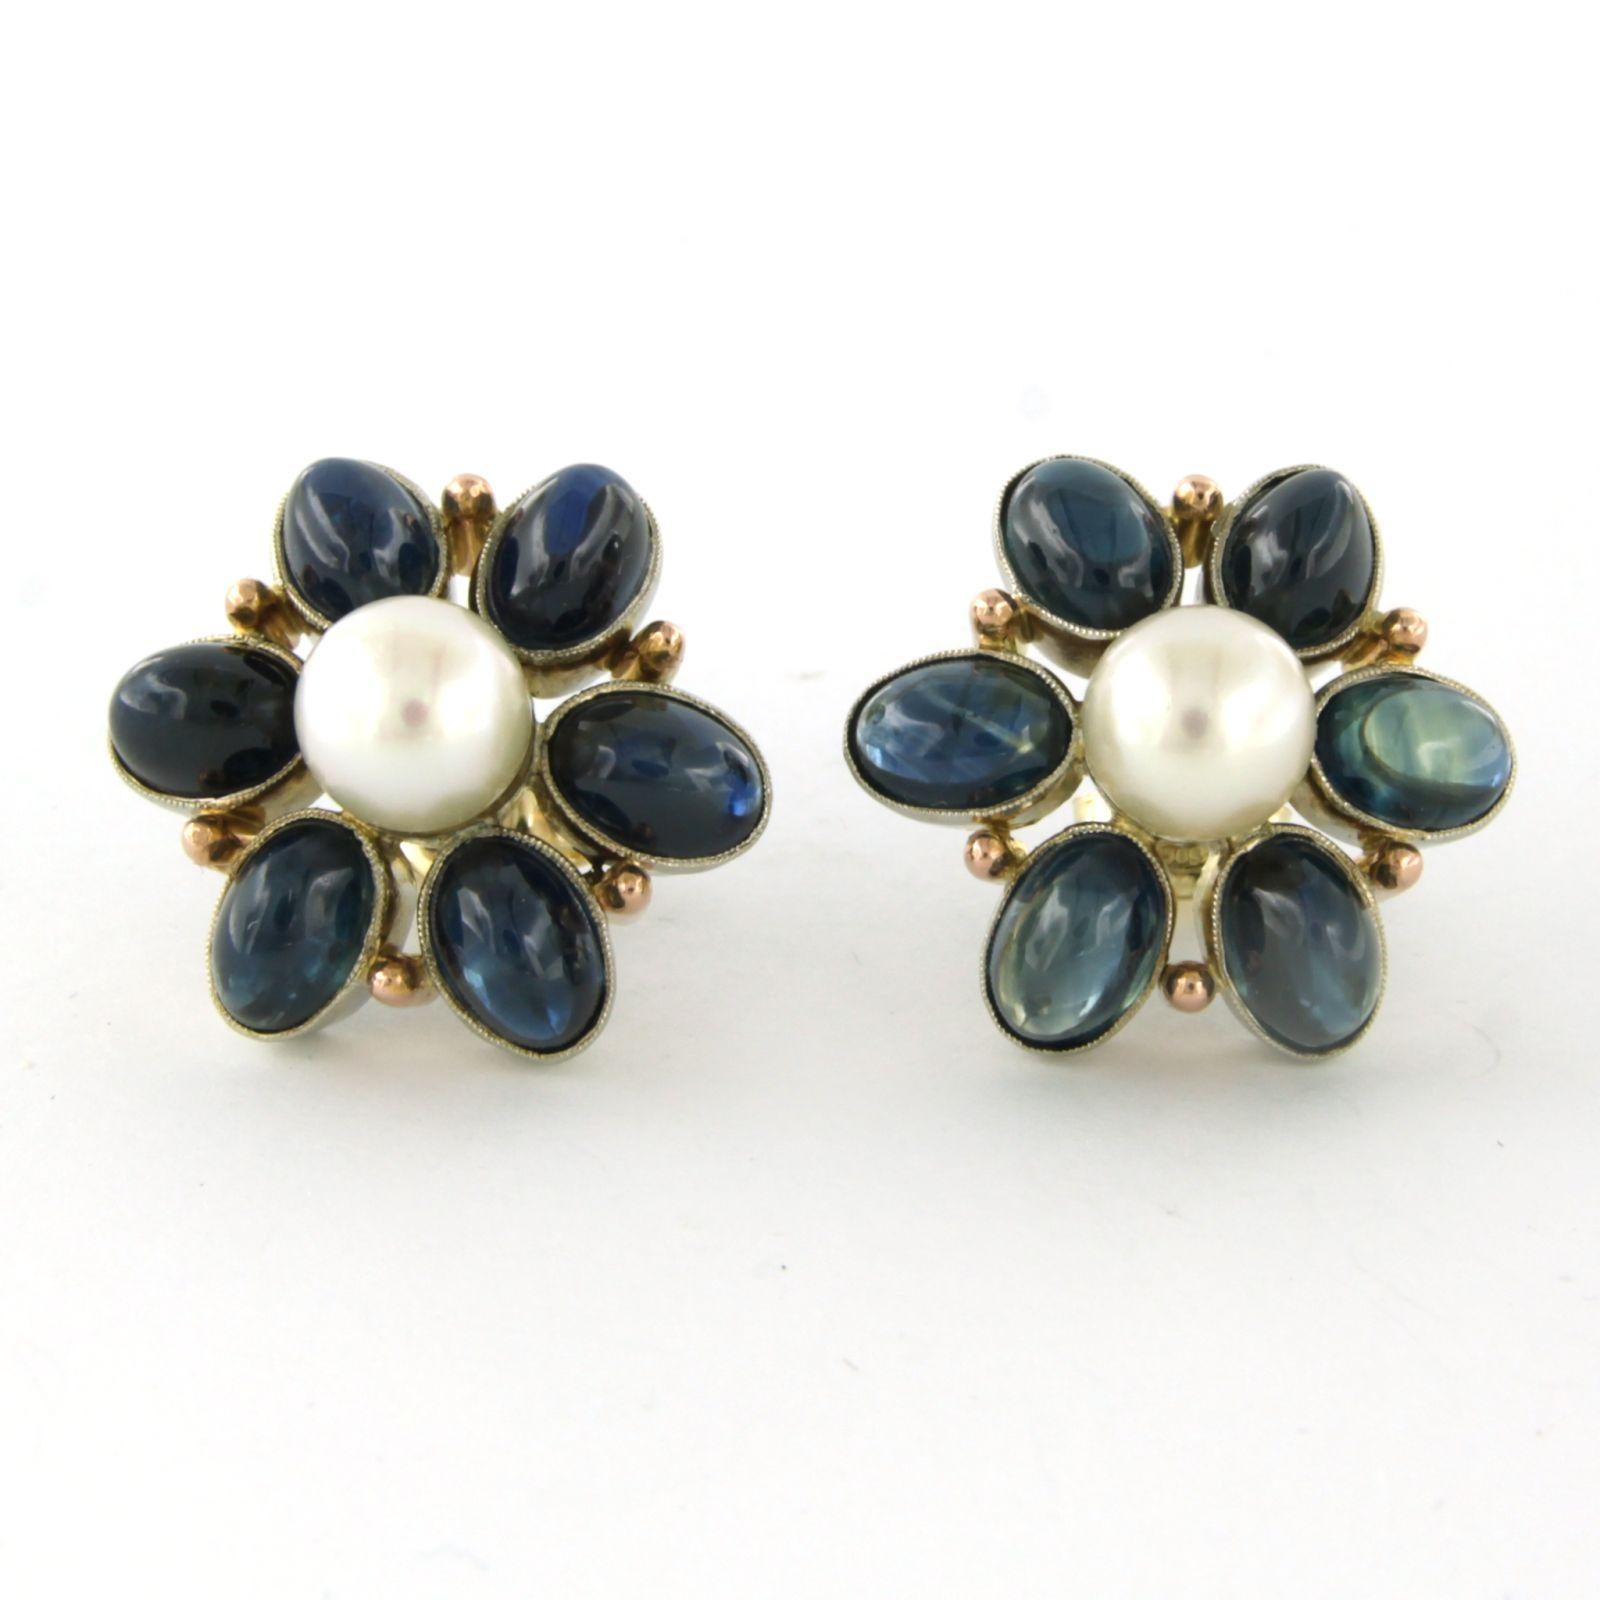 14k bicolour gold earrings set with pearl and sapphire

Detailed description:

The earrings have a diameter of 2.1 cm

Total weight 10.8 grams

set with

- 2 x 8.0 mm freshwater cultured pearls

colour White
purity: n/a

- 12 x 7 mm x 5 mm oval